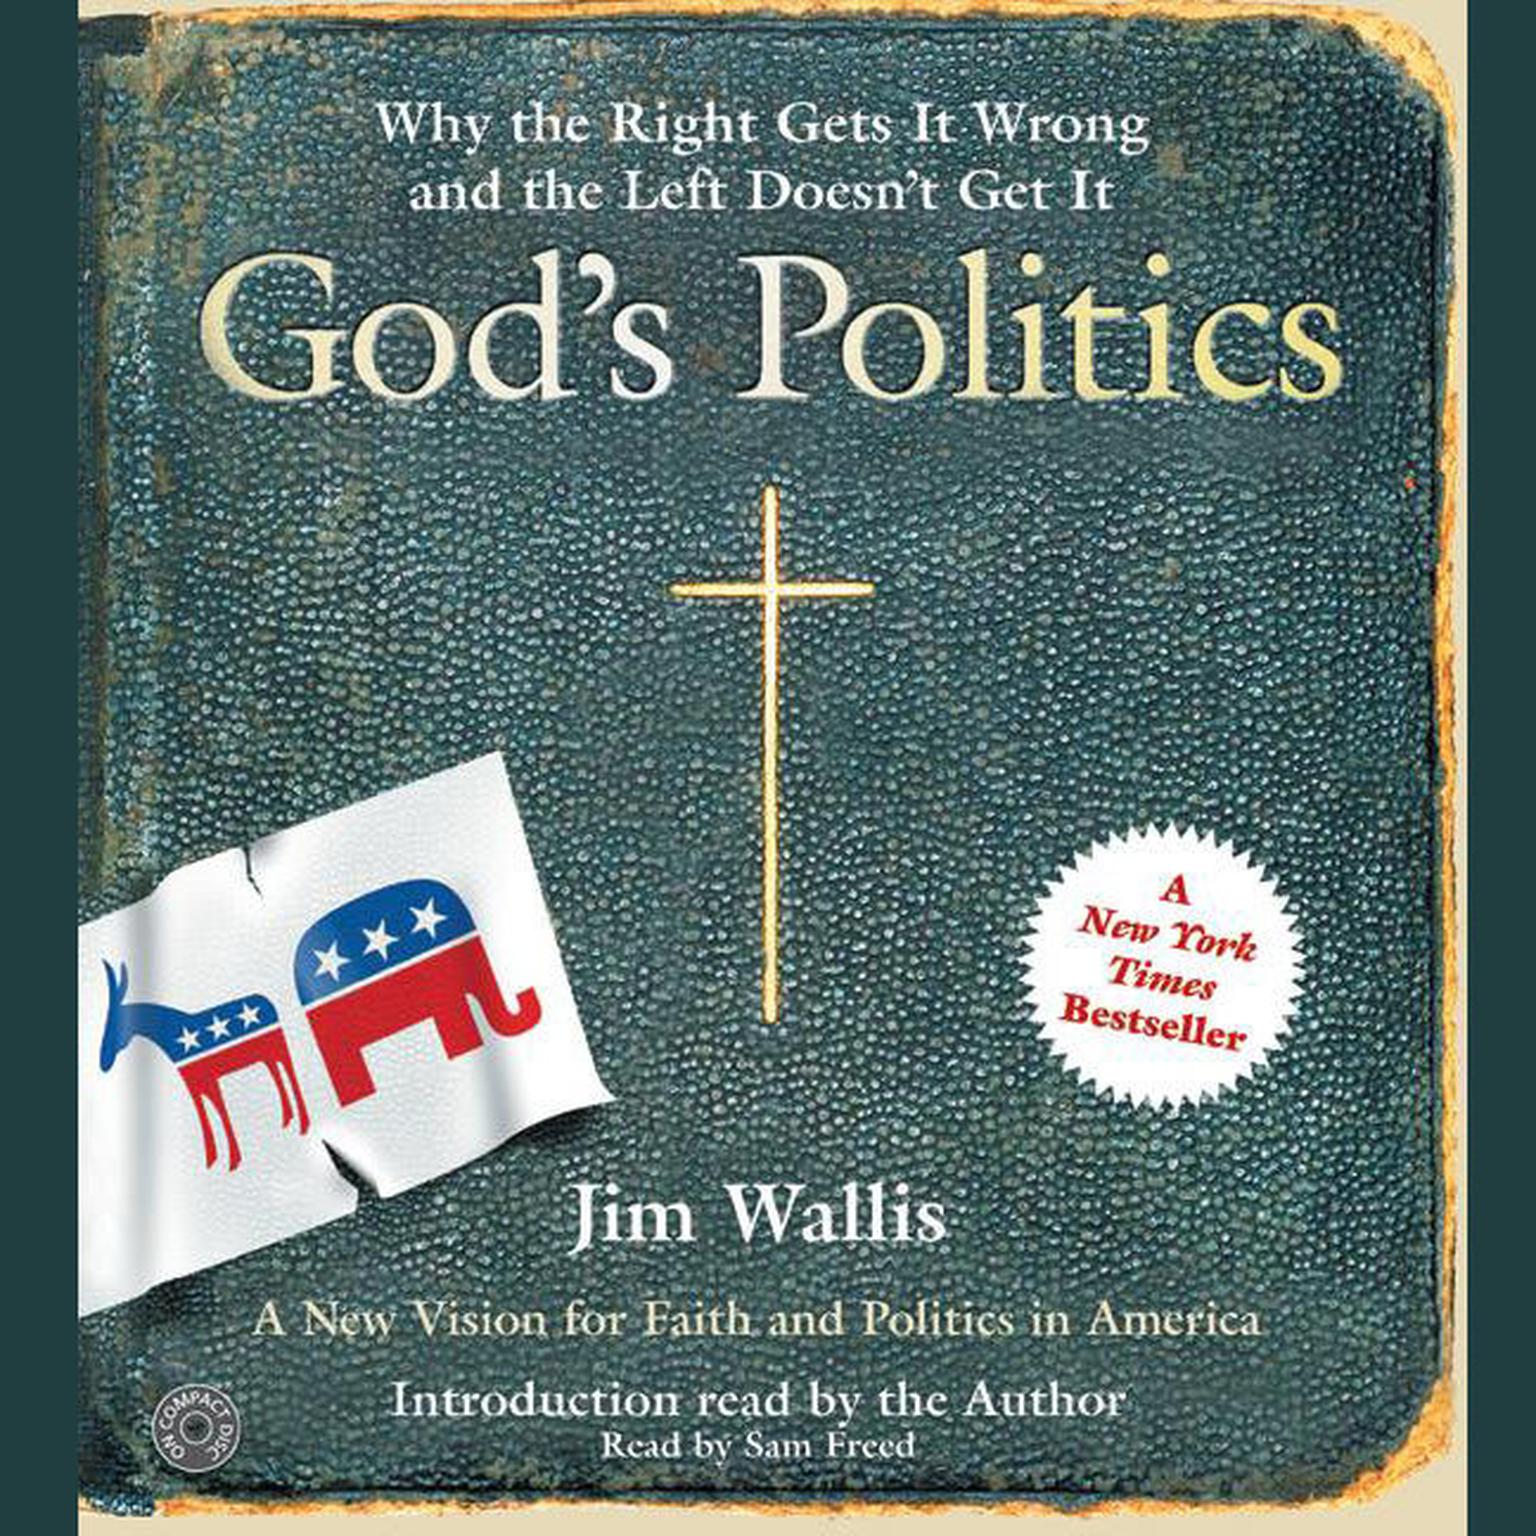 Gods Politics (Abridged): Why the Right Gets It Wrong and the Left Doesn’t Get It Audiobook, by Jim Wallis